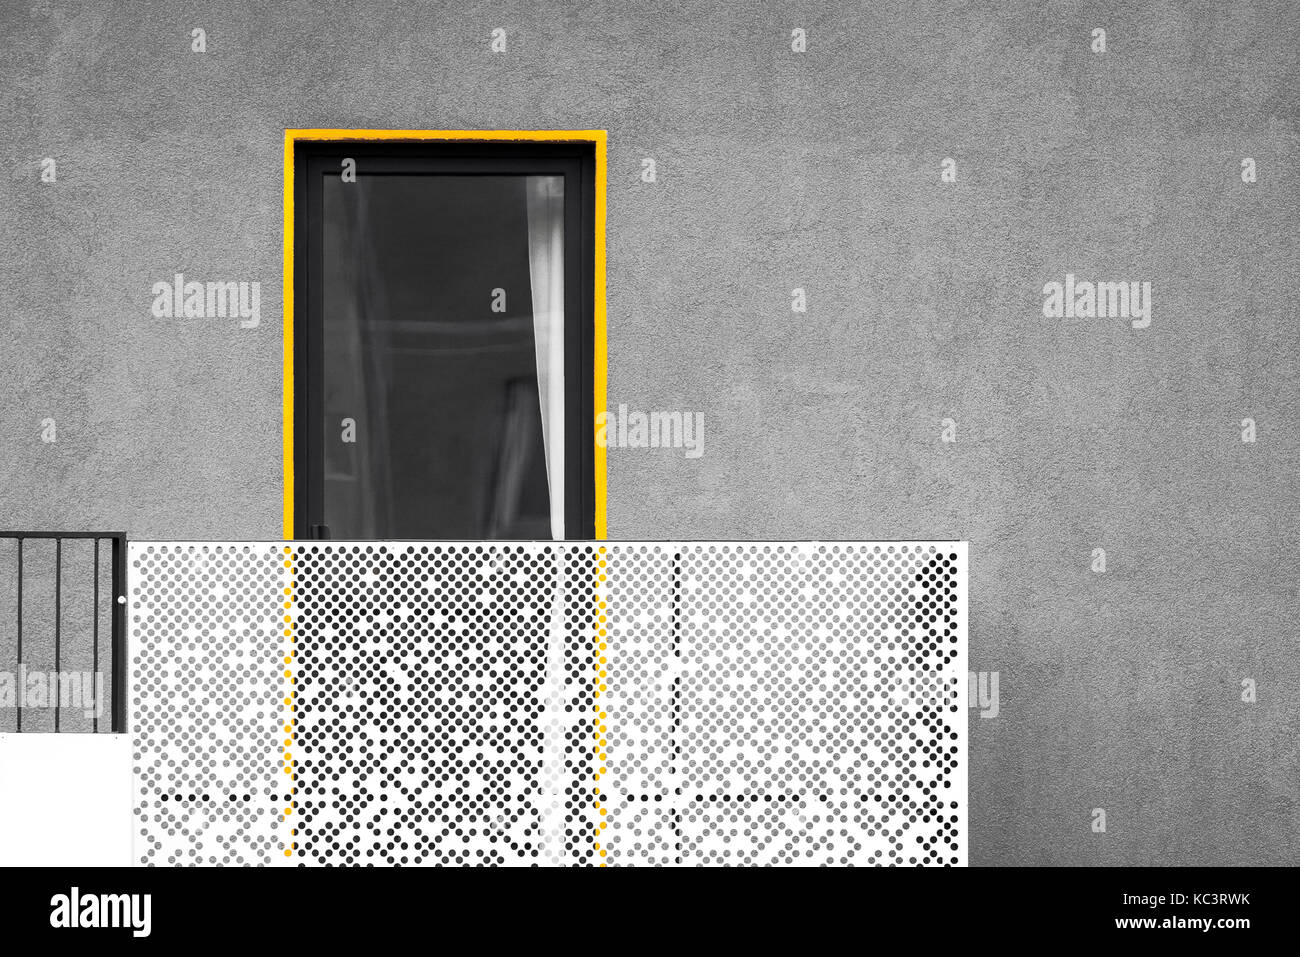 Abstract modern architecture with balcony and window. Black and white picture with yellow detail standing out Stock Photo